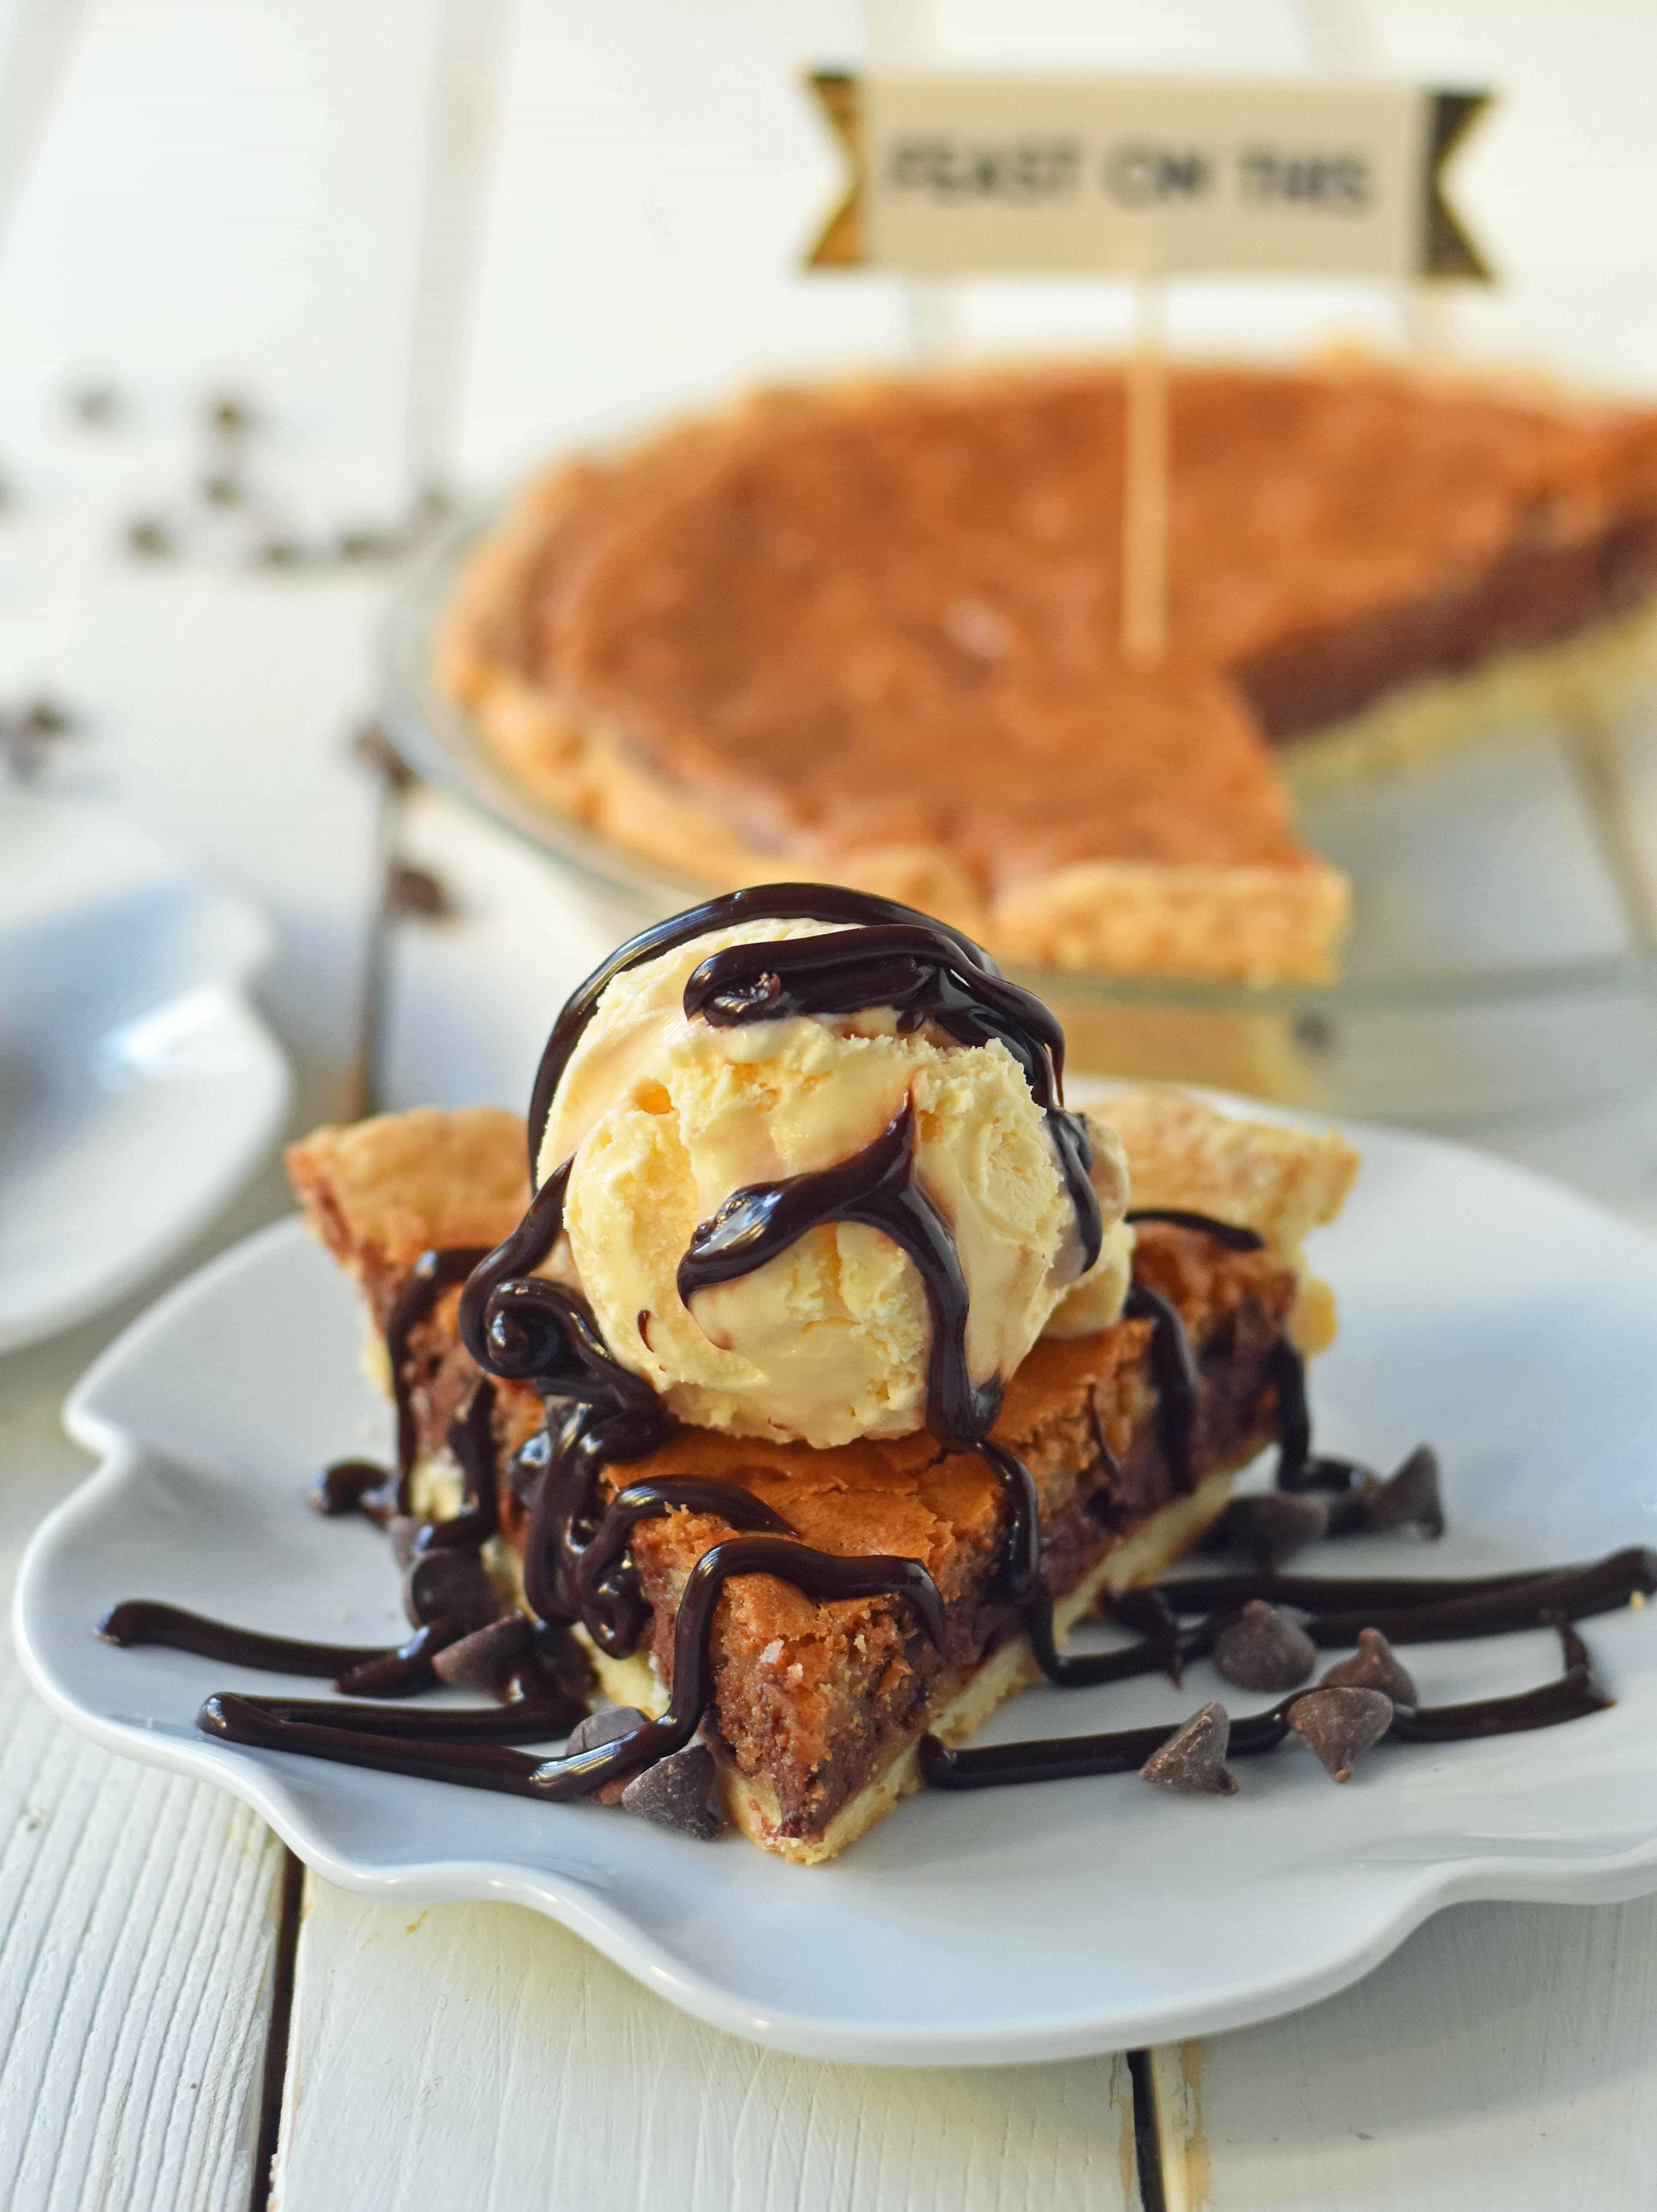 Chocolate Chip Cookie Pie with homemade chocolate chip cookie dough baked in a buttery flaky pie crust and topped with vanilla bean ice cream and hot fudge. The BEST Chocolate Chip Cookie Pie Recipe. www.modernhoney.com